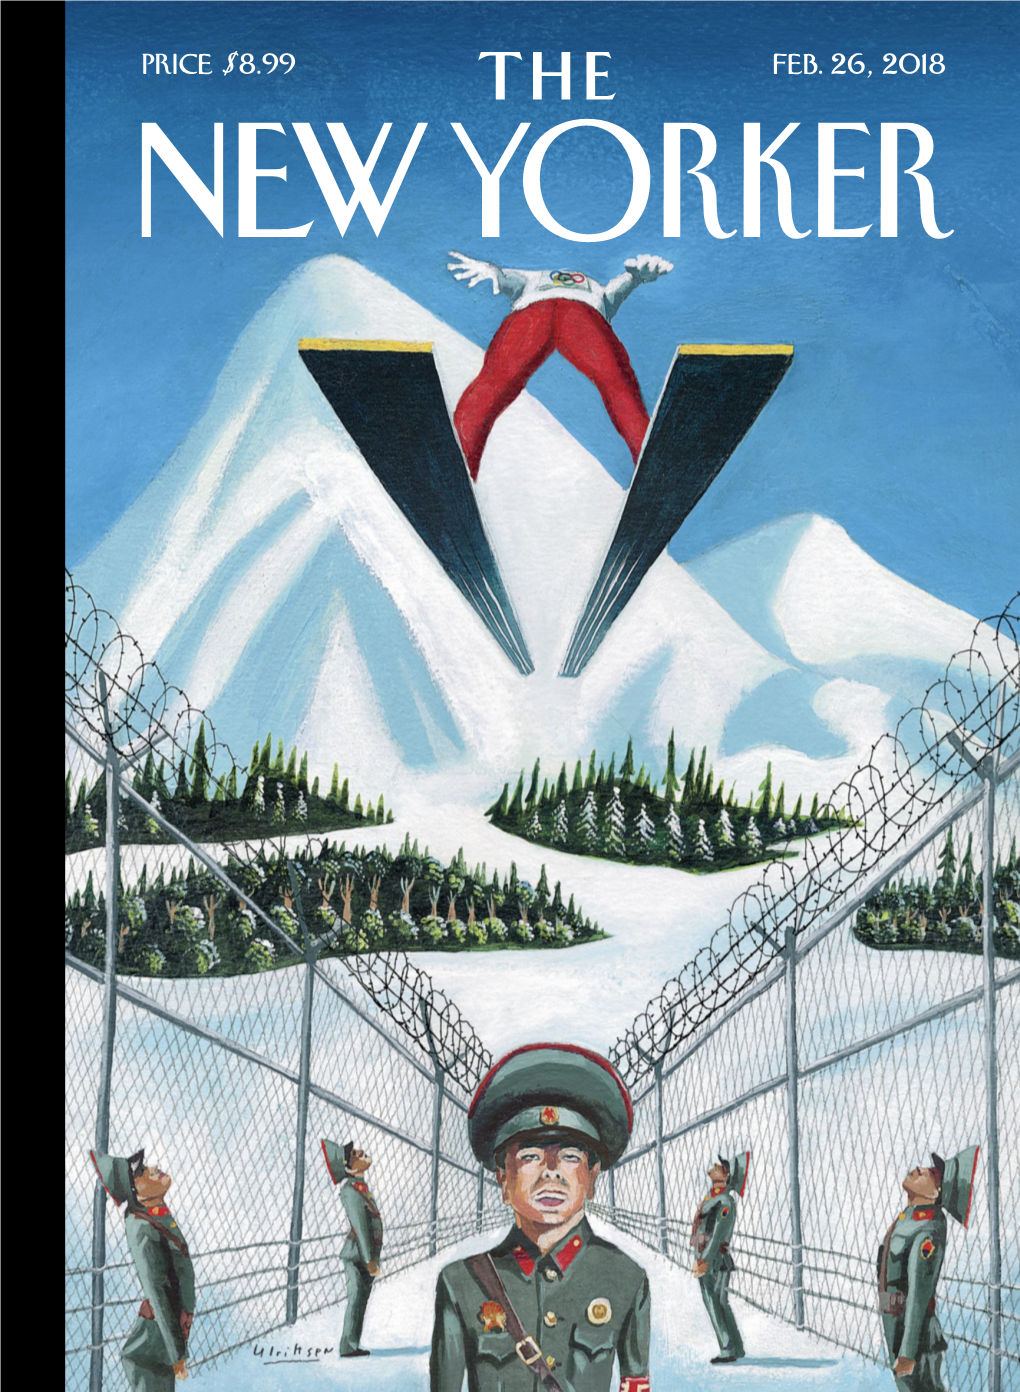 The New Yorker, February 26, 2018 1 Promotion